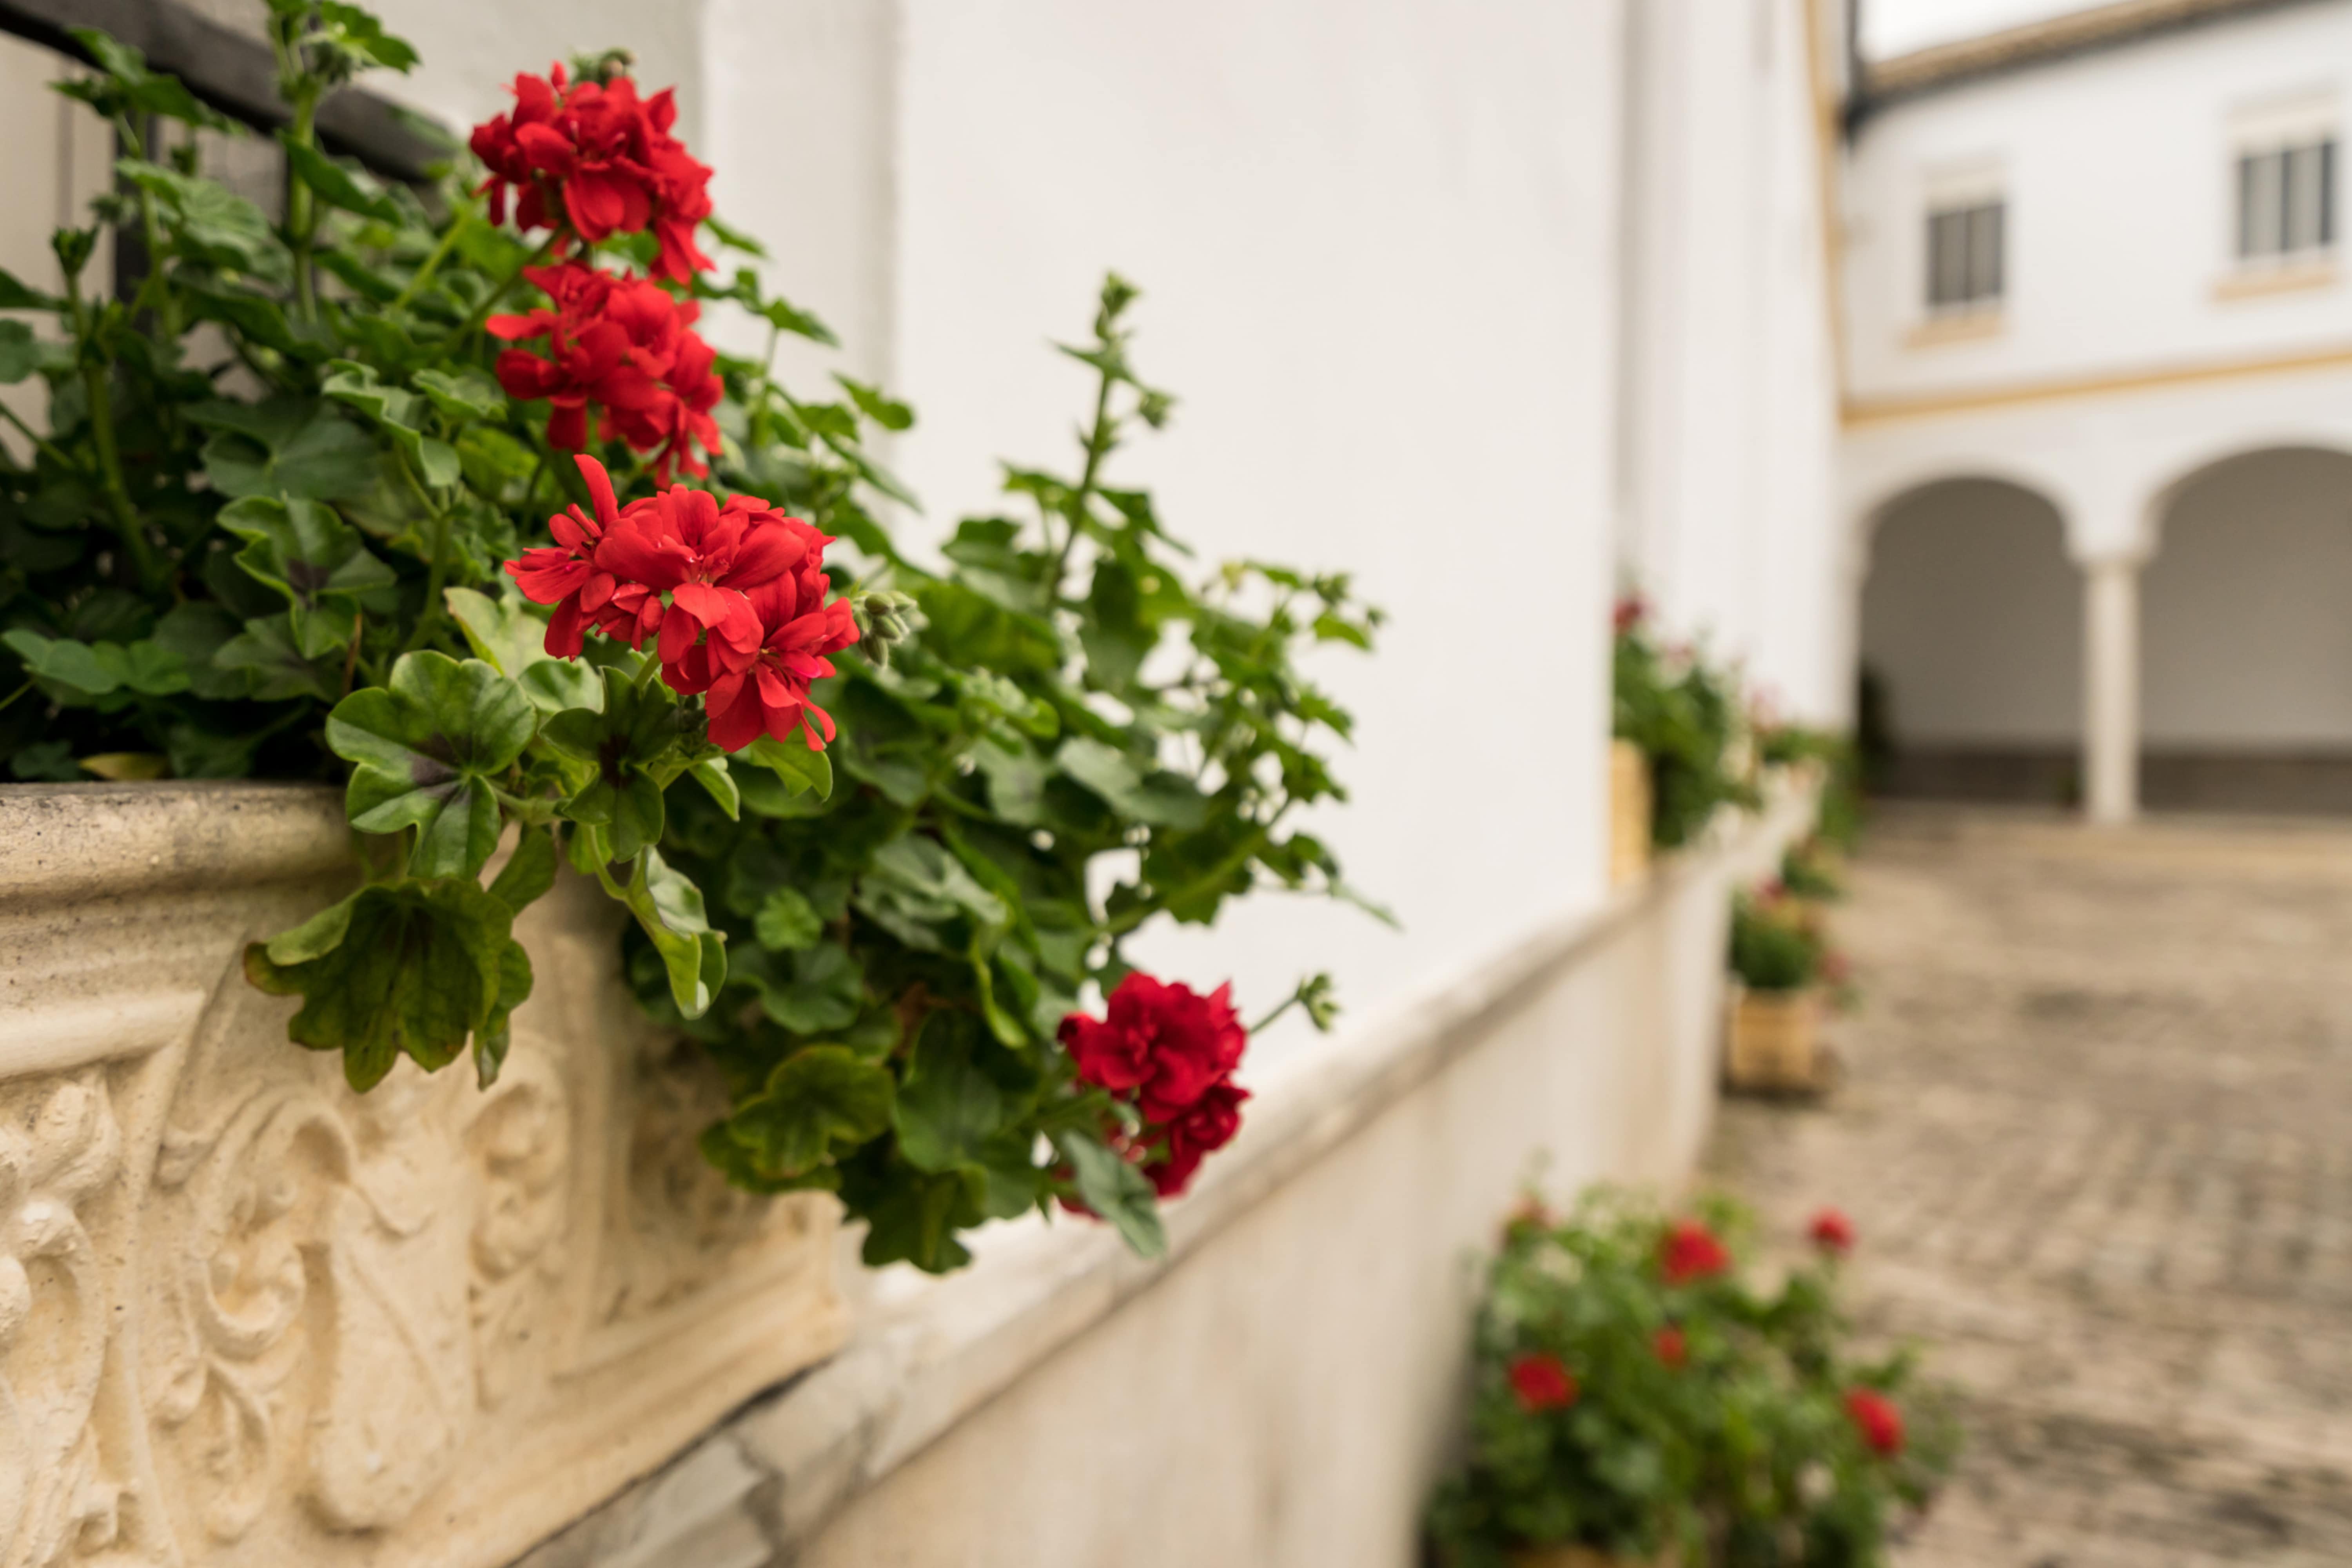 How To Boost Your Home’s Curb Appeal With Window Box Planters